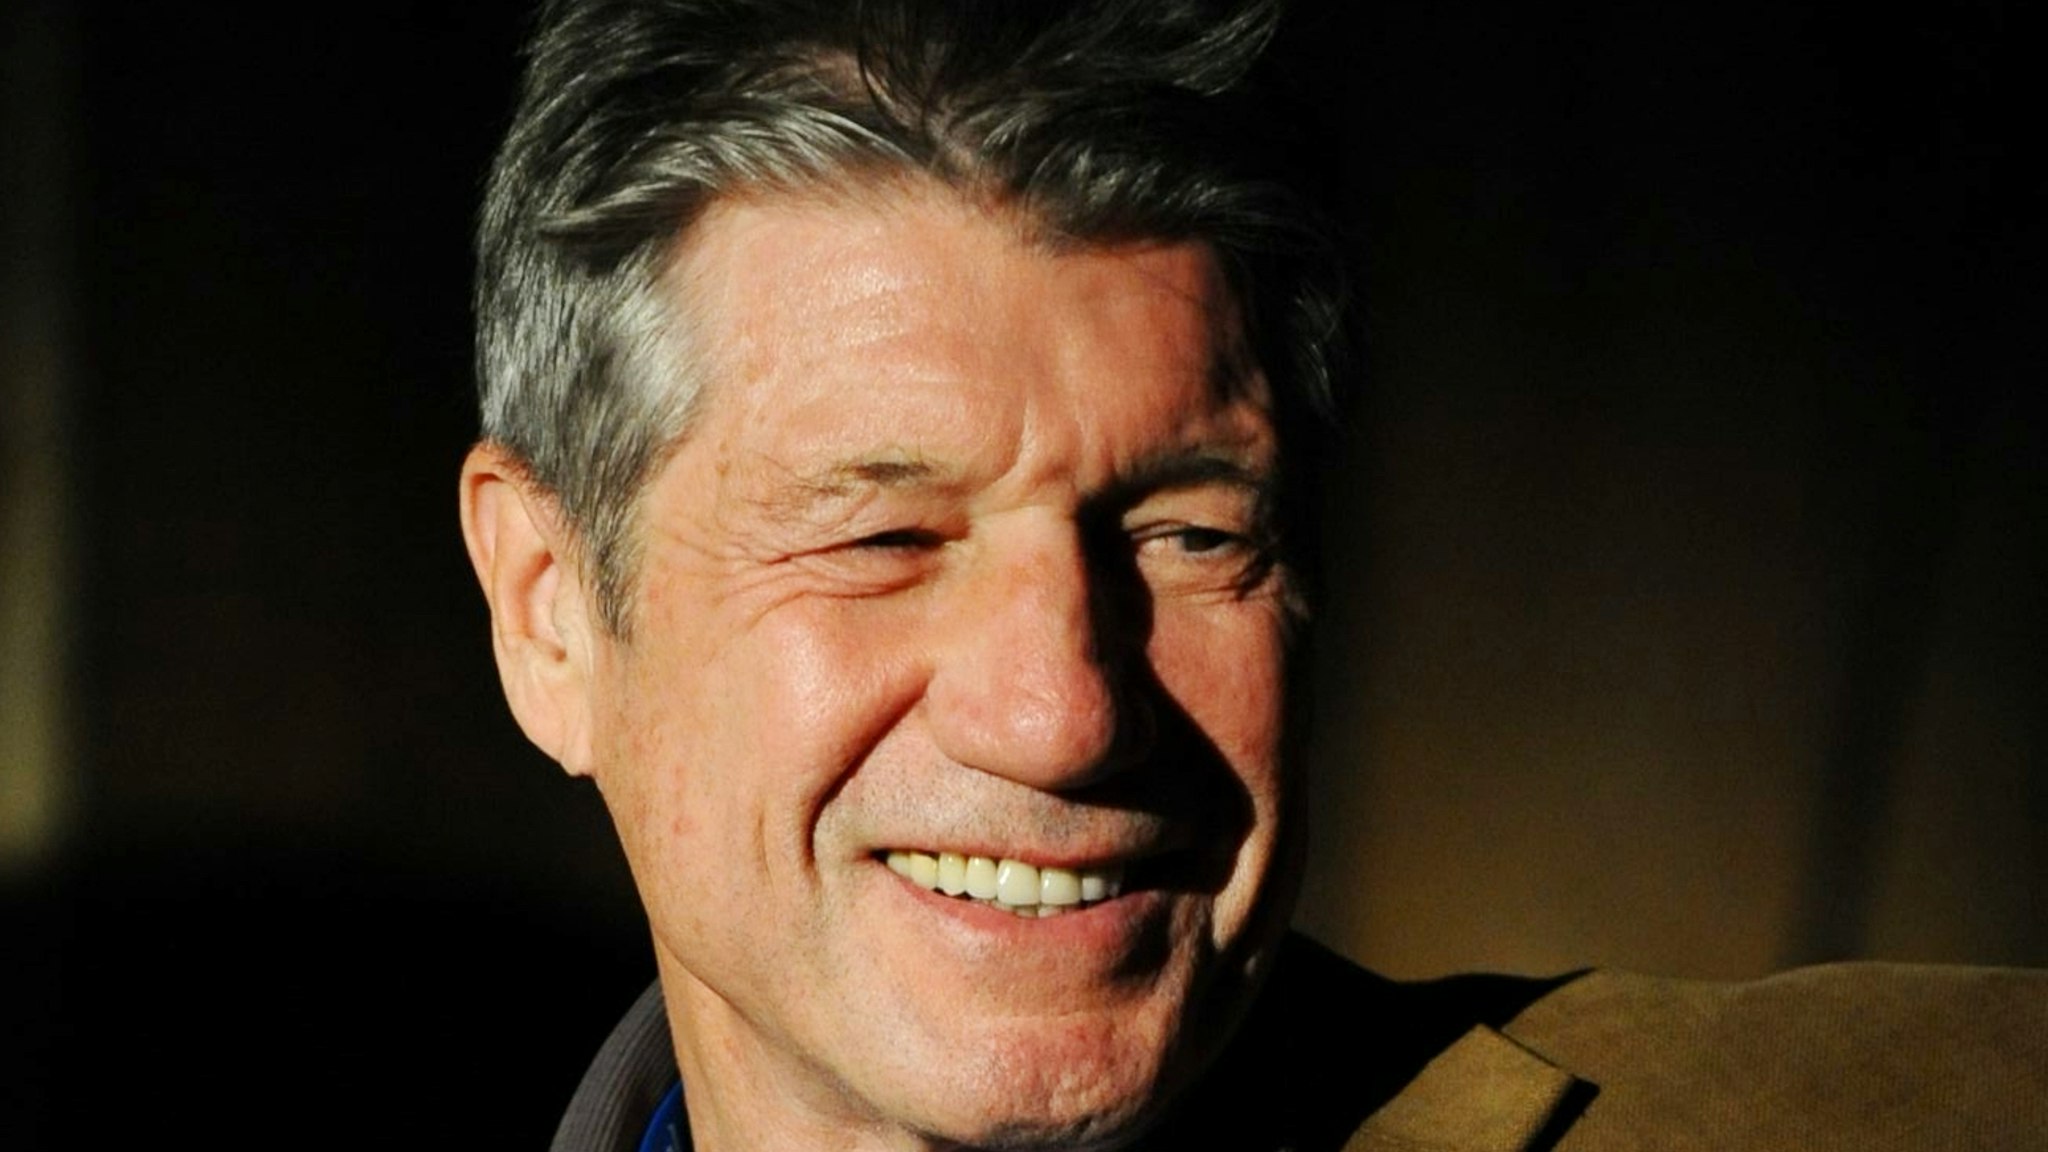 Actor Fred Ward Q&A during the 36th Telluride Film Festival held at the Galaxy Theatre on September 4, 2009 in Telluride, Colorado